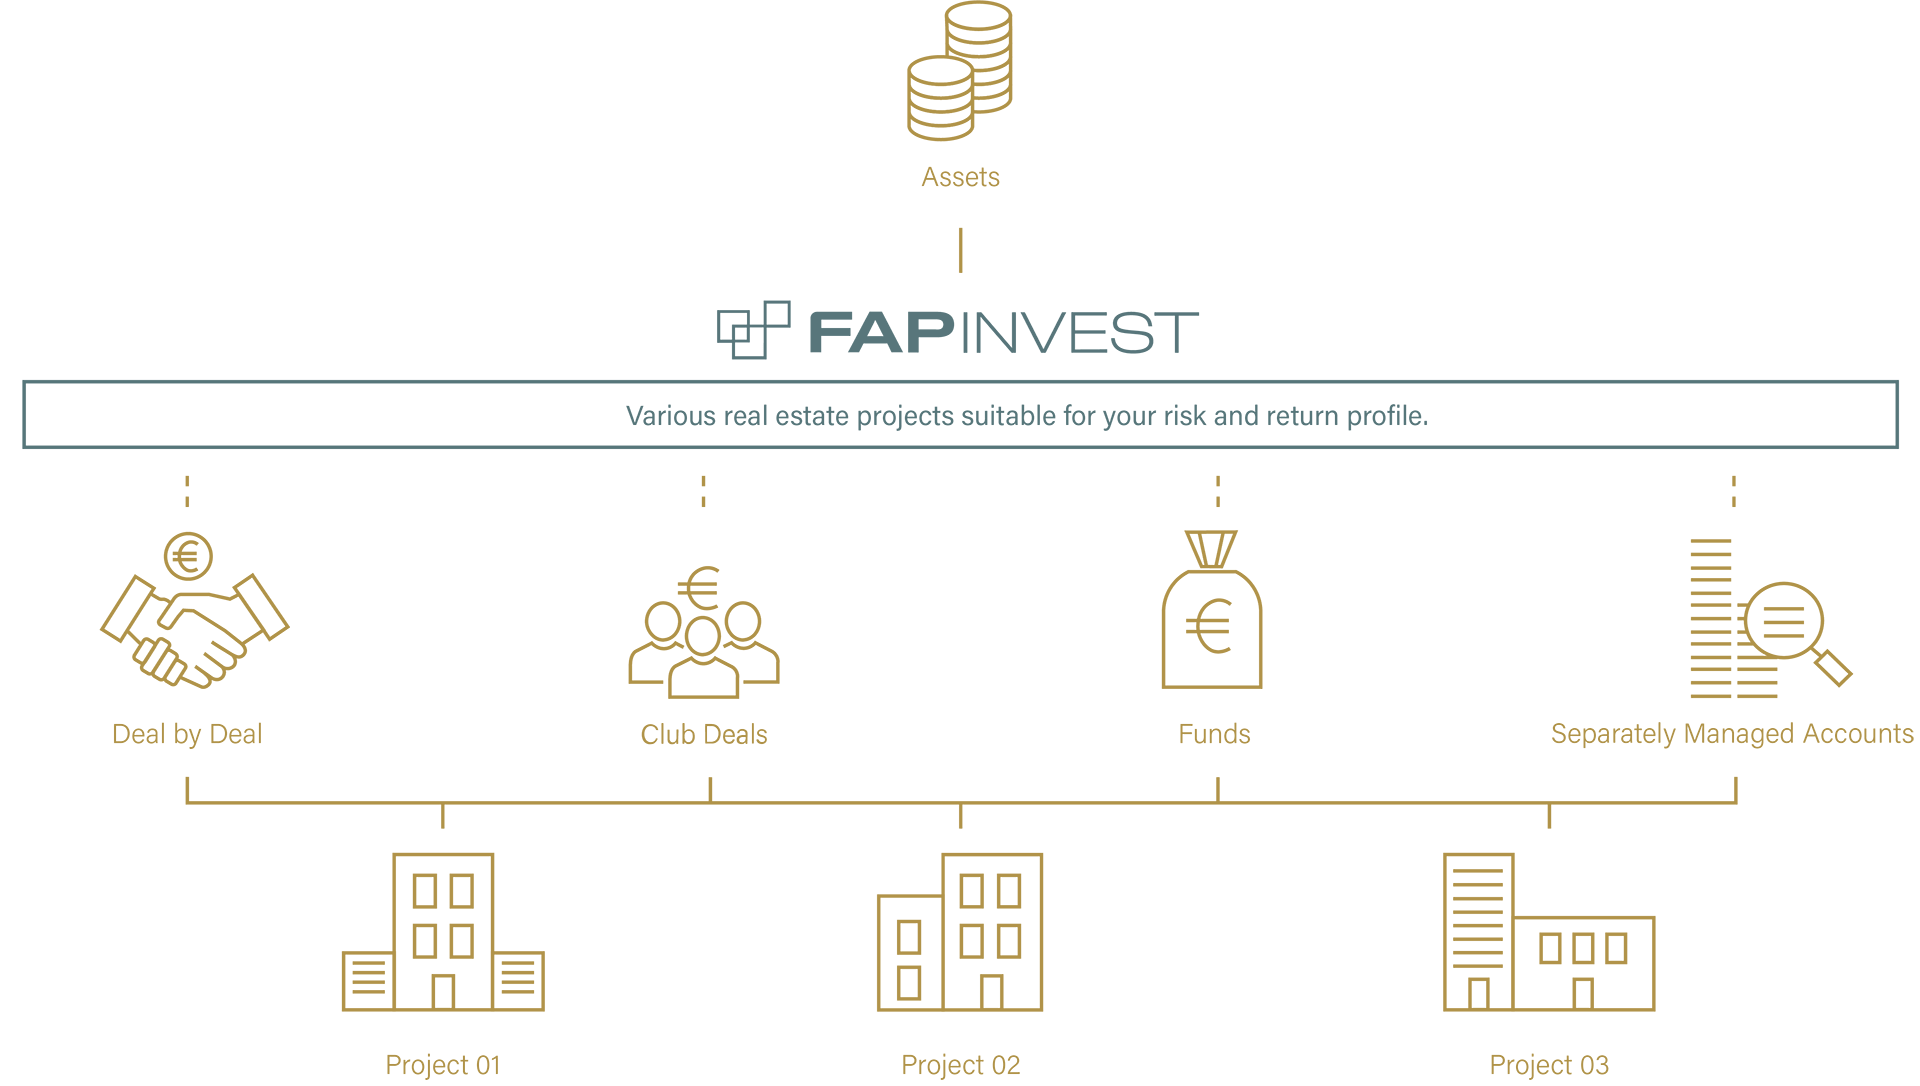 FAP Invest - Deal by Deal, Club Deals, Fonds, Separately Managed Accounts